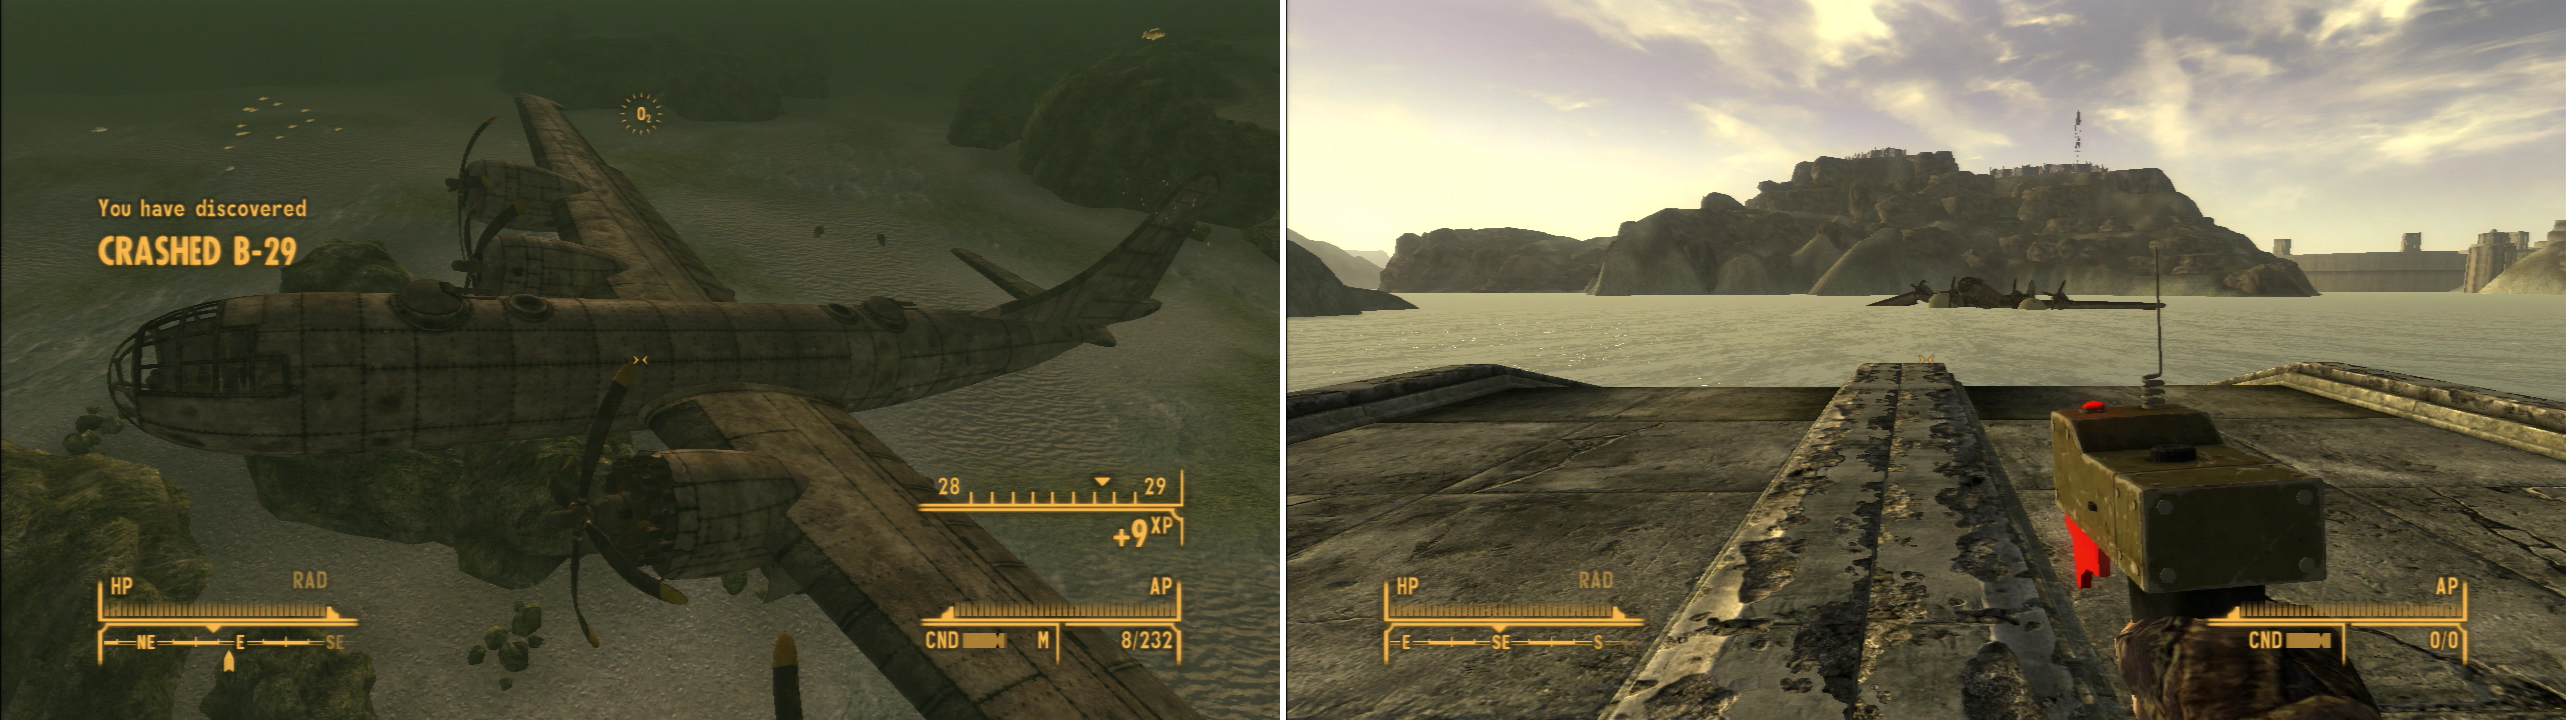 Find the sunken bomber at the bottom of the Lake Mead (left) and bring it back to the surface with Deployable Ballasts (right).